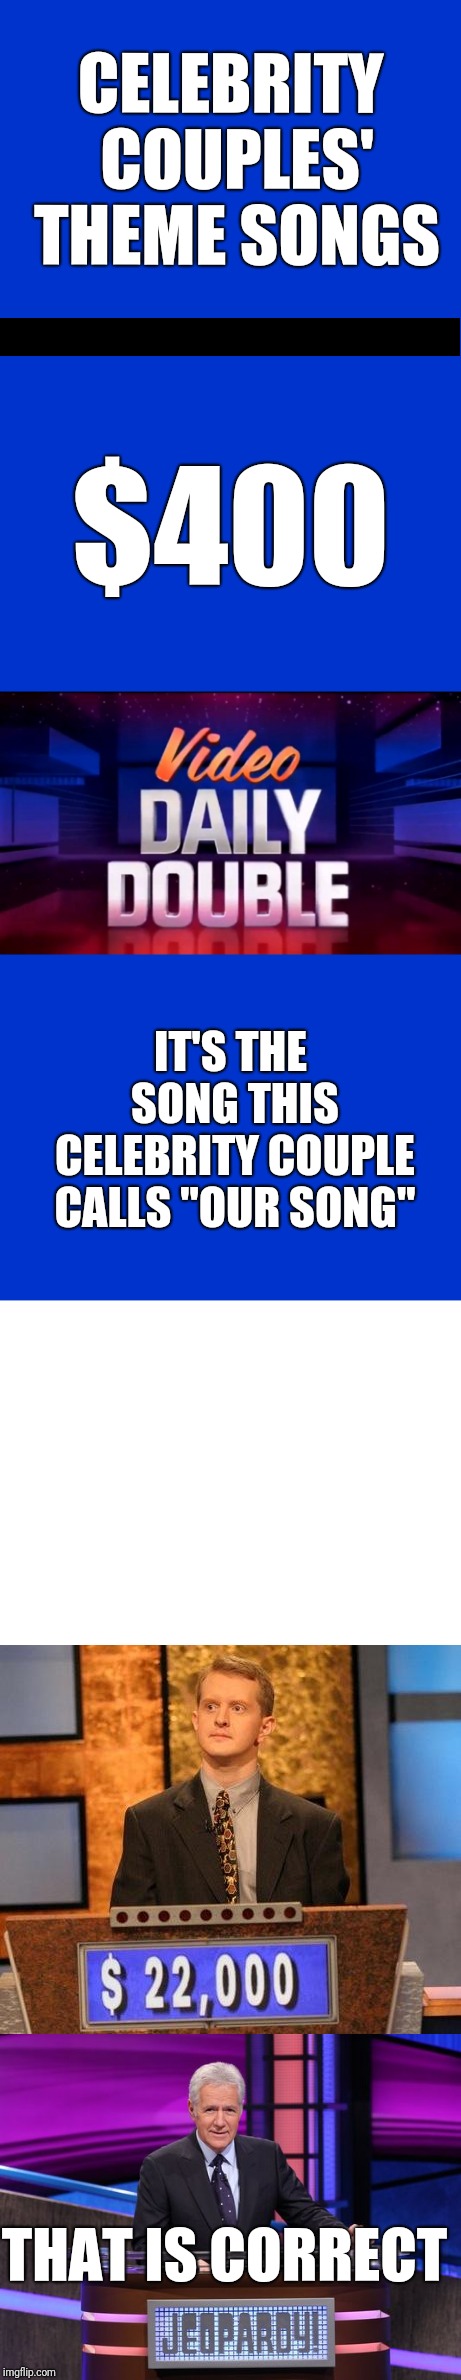 jeopardy-celebrity-couples-theme-song-blank-blank-template-imgflip